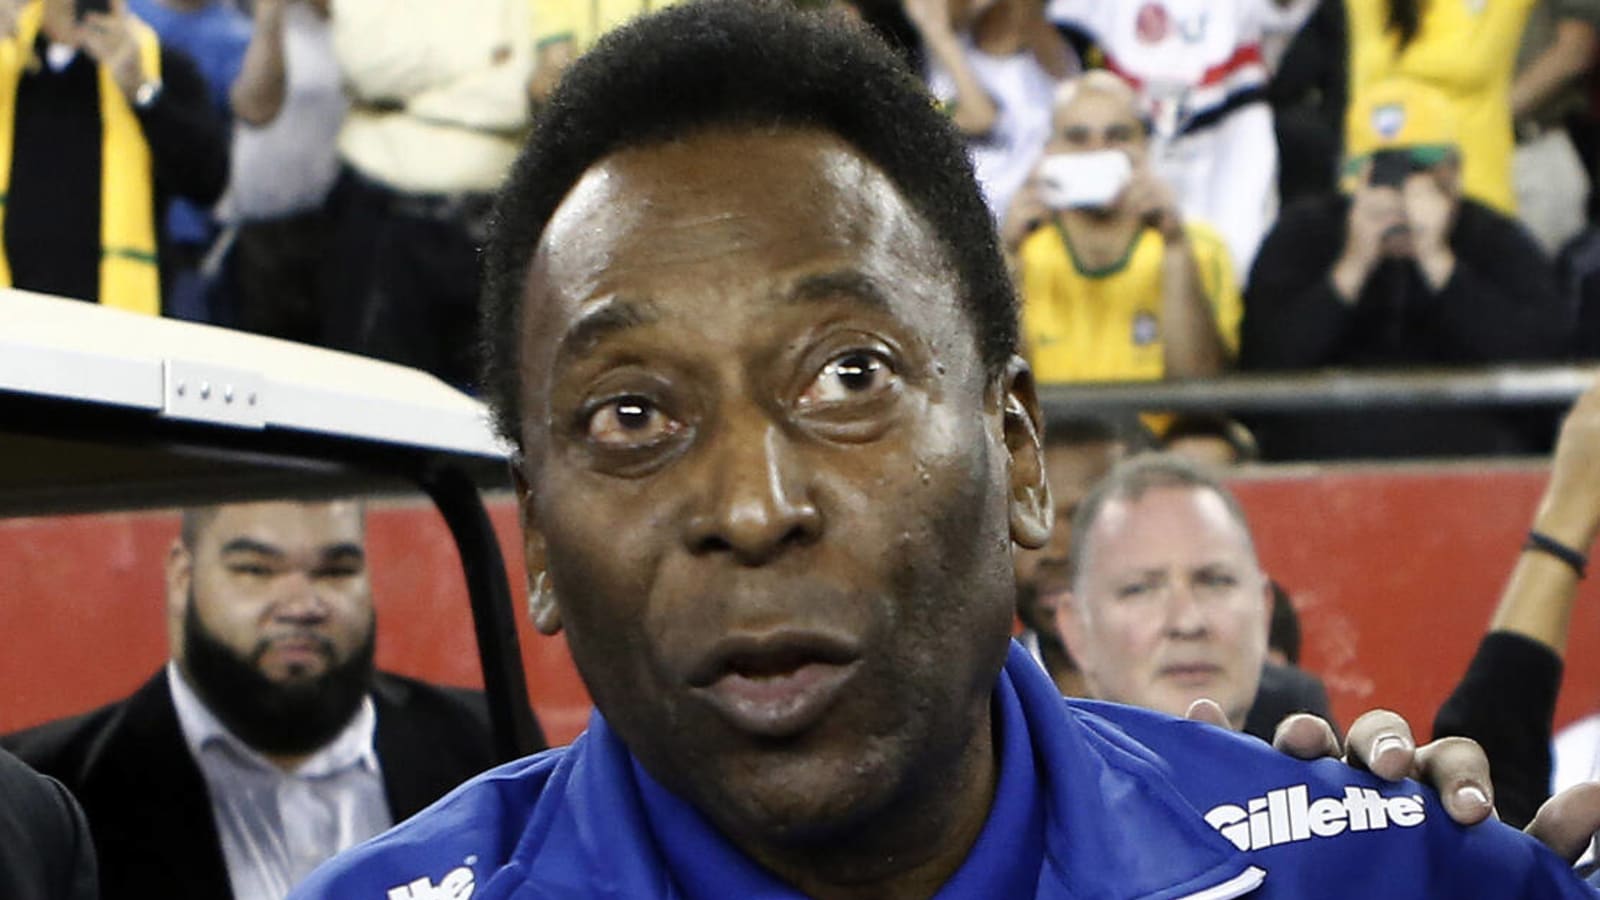 Pele's condition 'worsening' after being hospitalized in Brazil